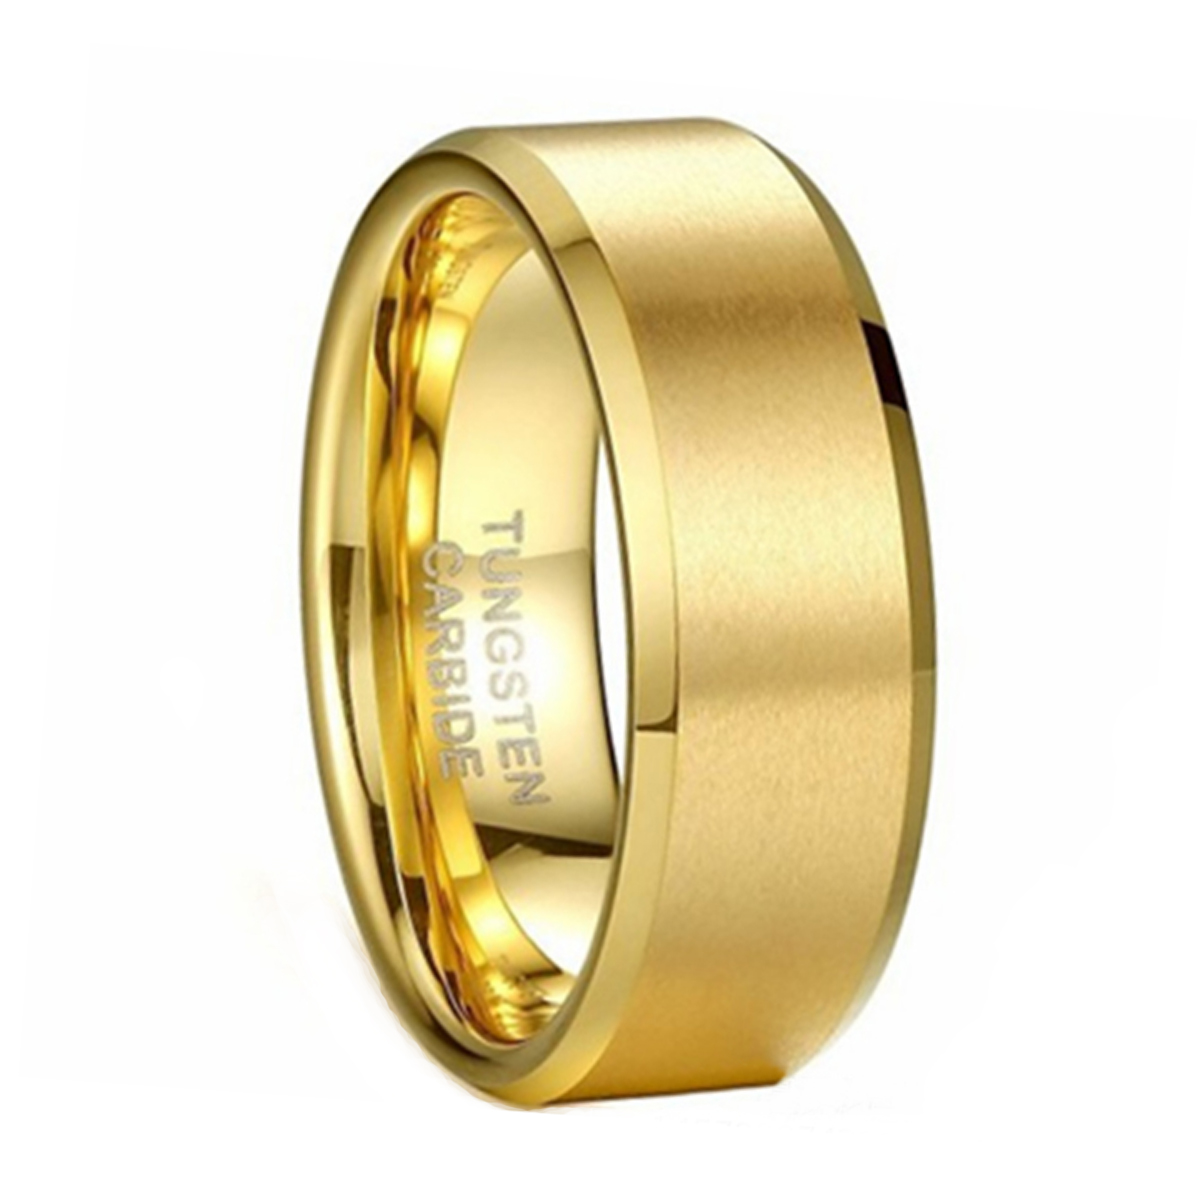 Is women tungsten wedding rings OK for electricians?